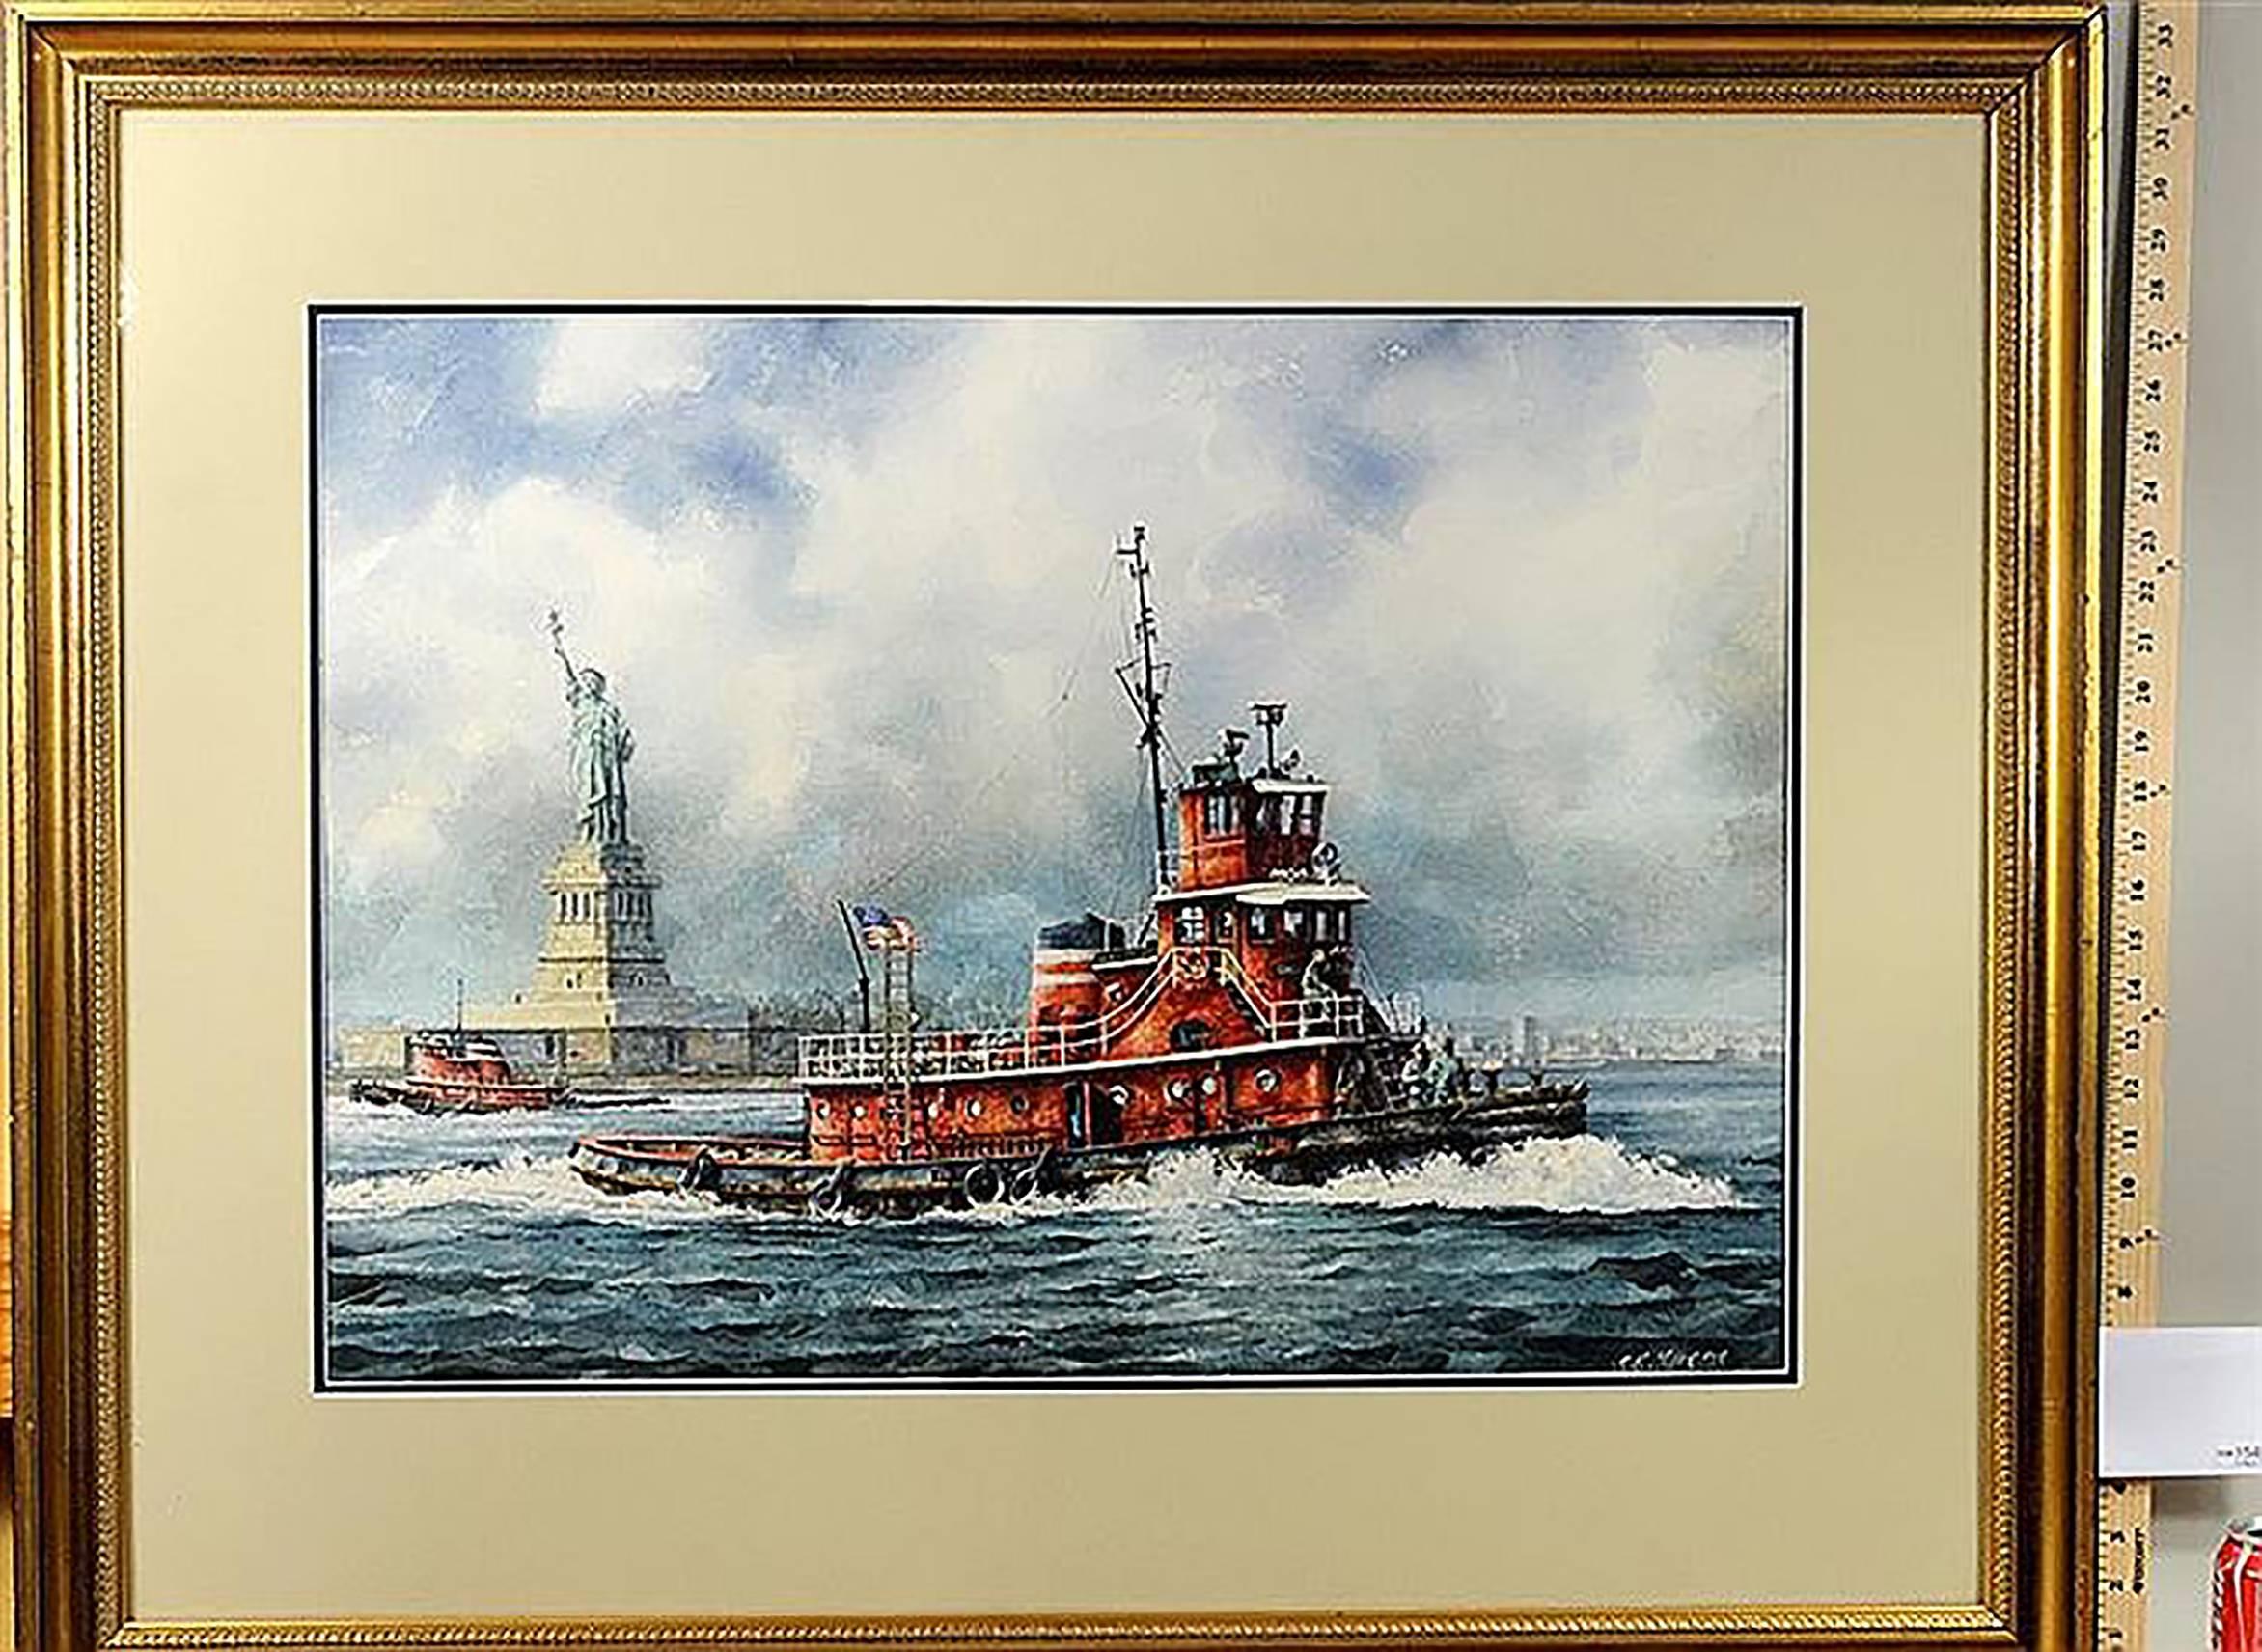 The Tug Boat Brian McAllister off Liberty Island with Statue of Liberty in  - Art by Keith Miller